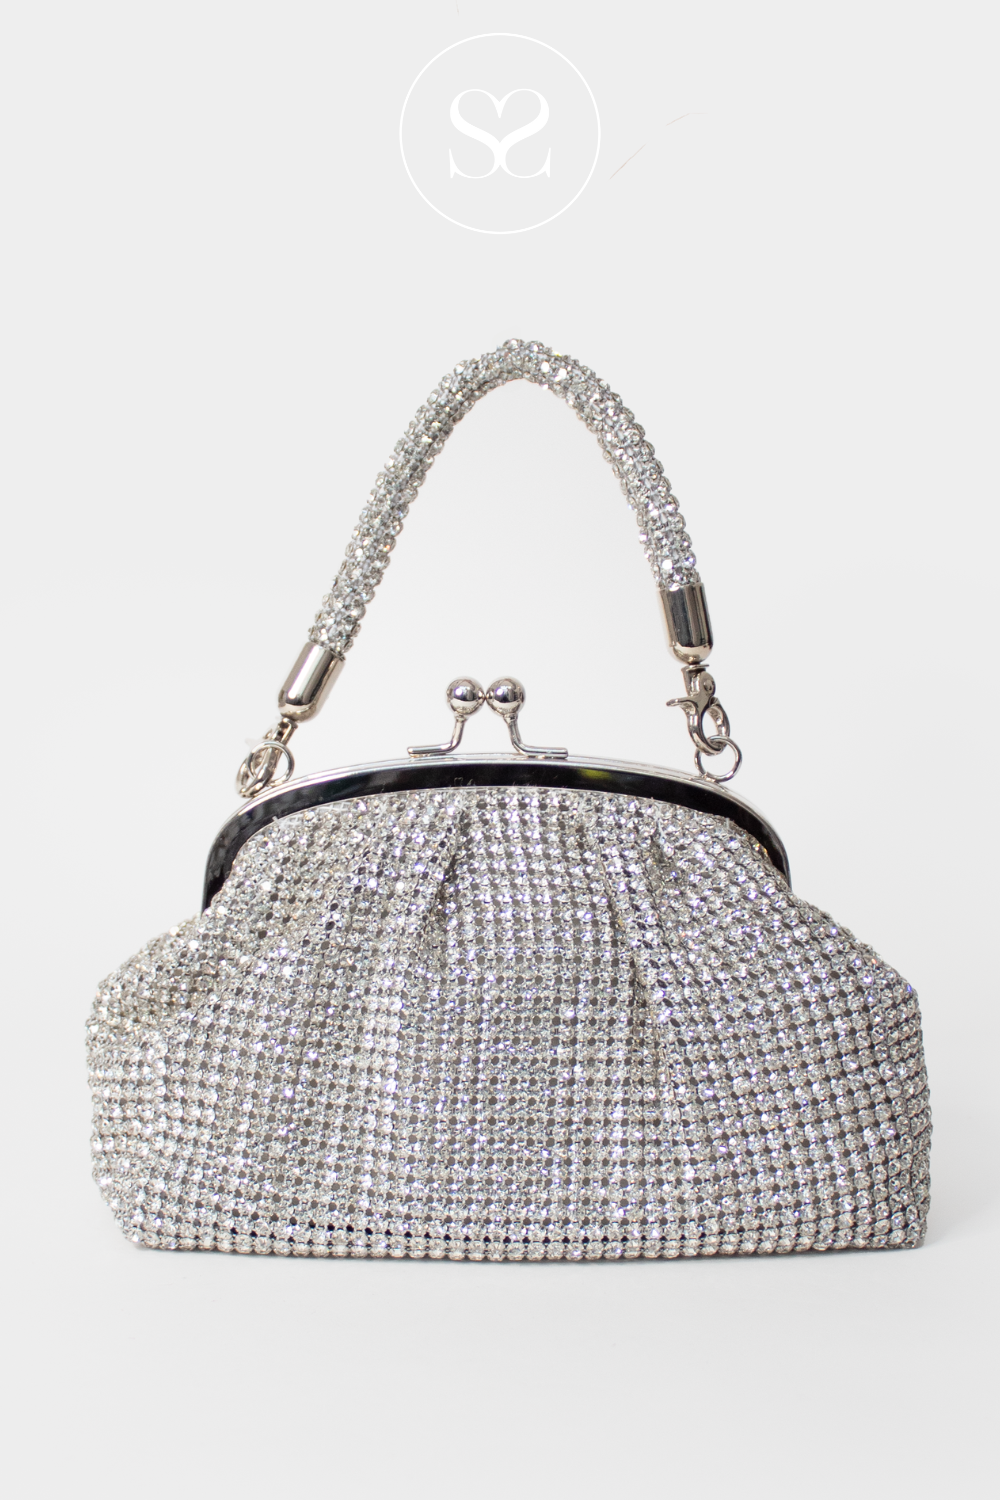 SHENEIL 0634 SILVER DIAMANTE GLITZY PARTYWEAR OCCASSION CLUTCH BAG WITH SNAP CLASP AND SMALL HANDLE